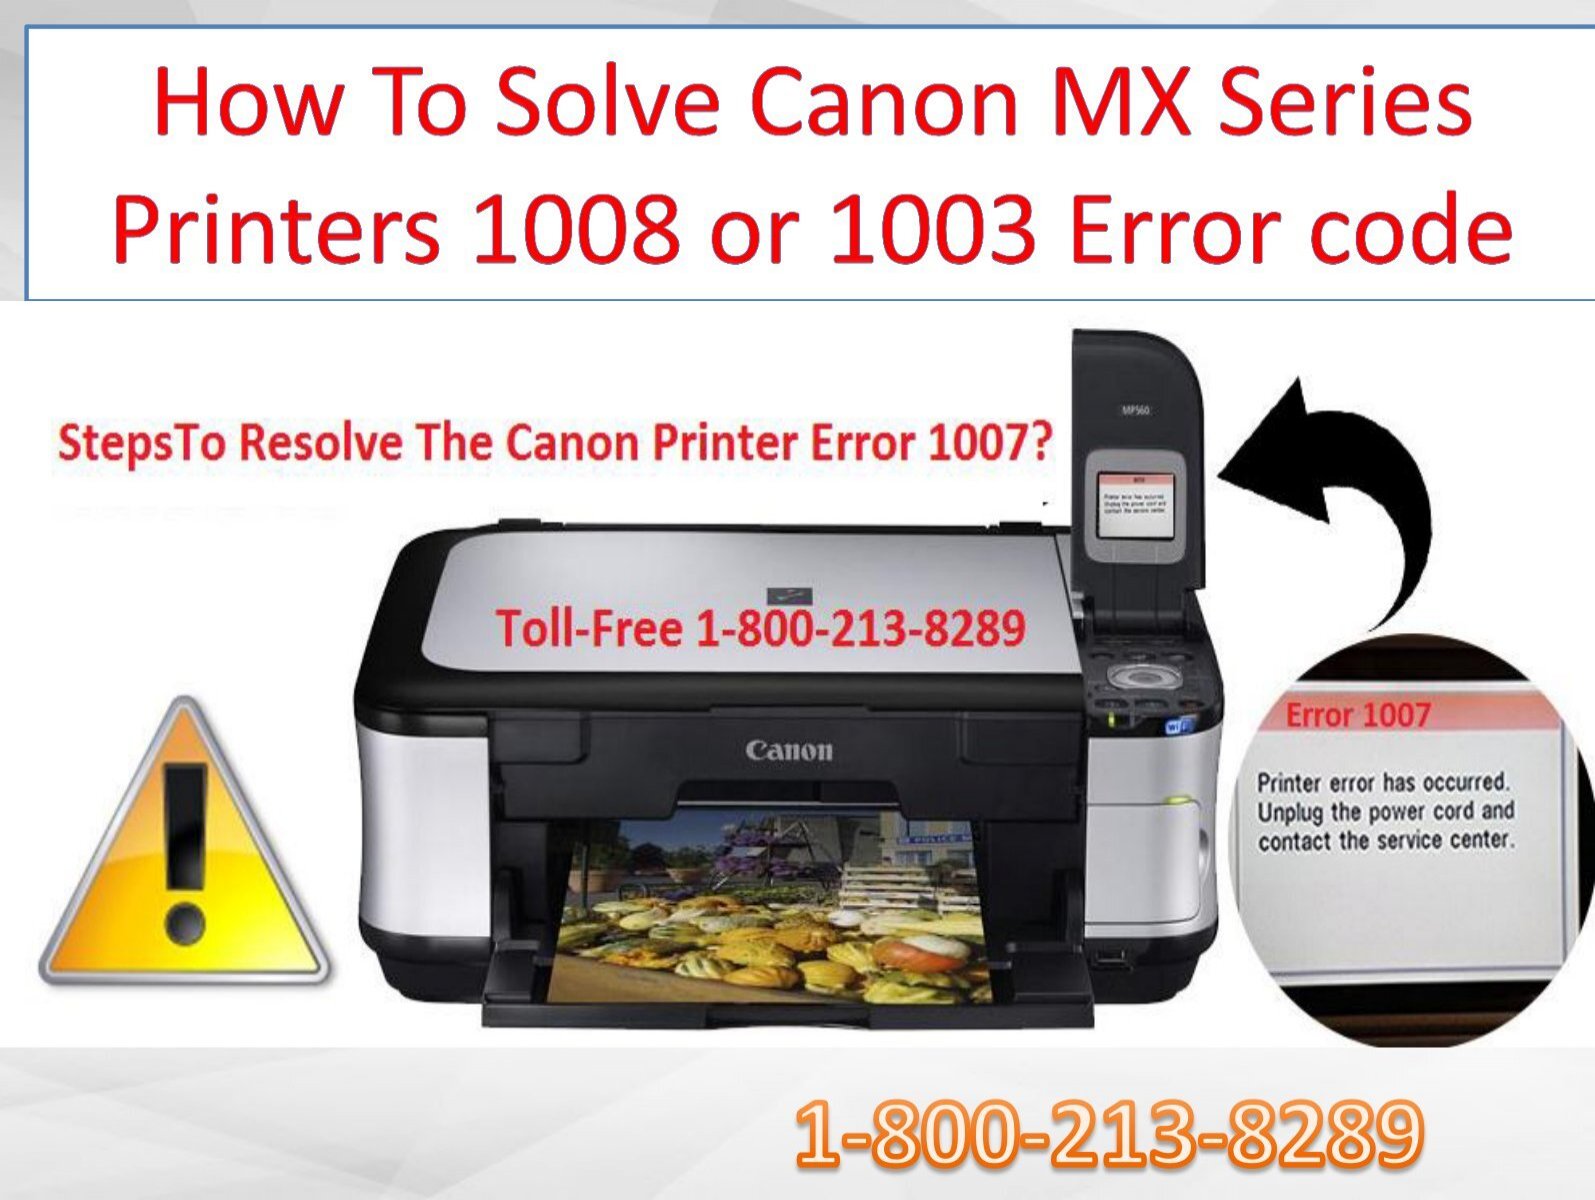 How To Solve Canon Mx Series Printers 1008 Or 1003 Error Code